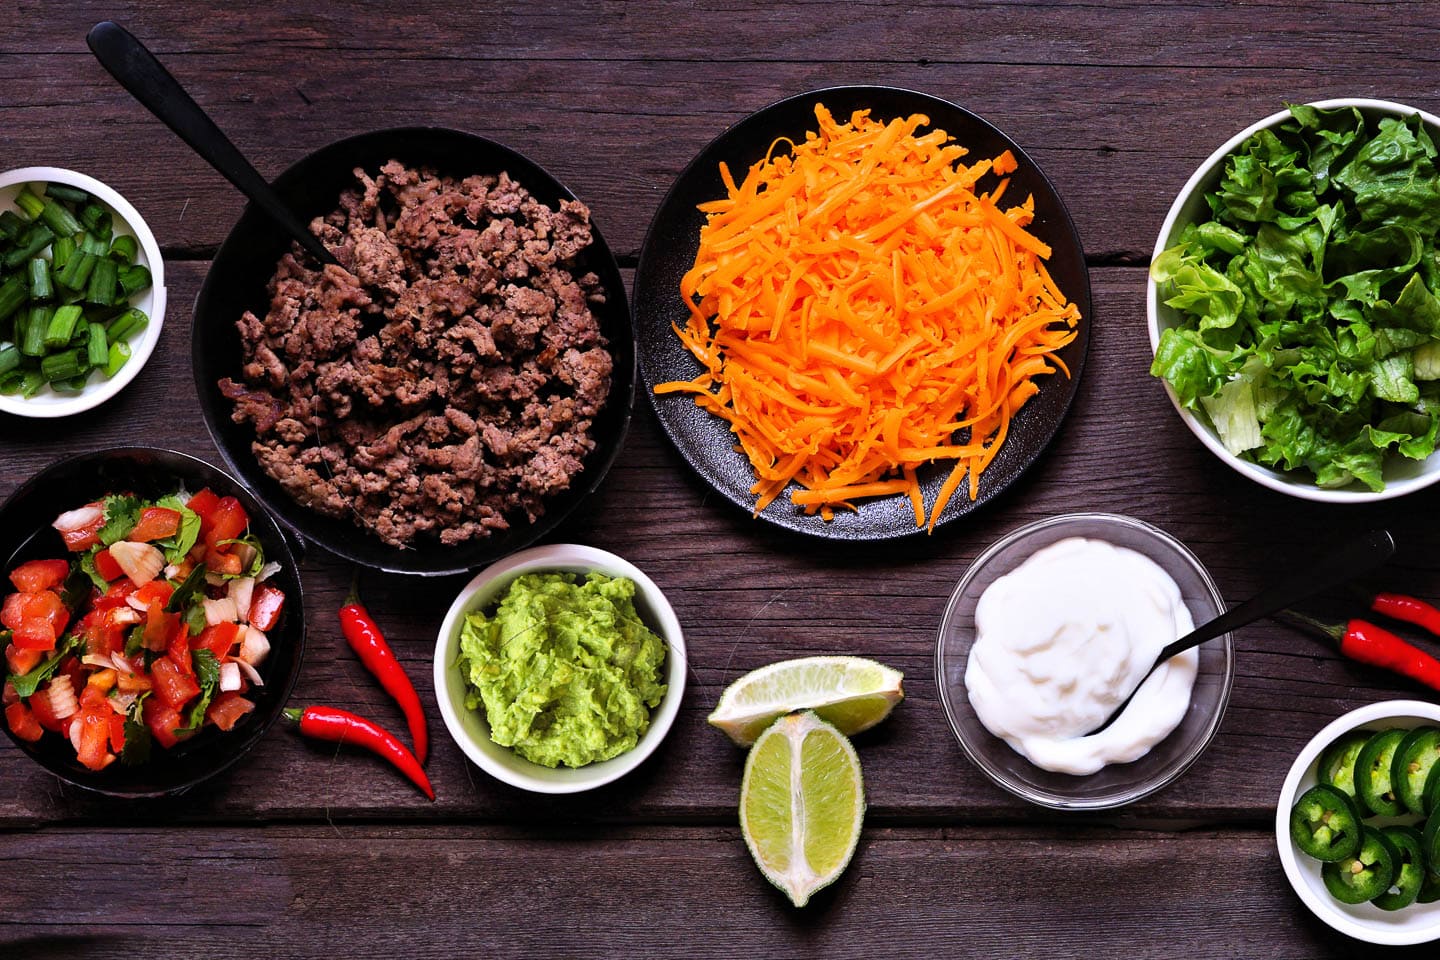 toppings for nachos - including green onions, pico de gallo, guacamole, grated cheese, sour cream, lettuce and jalapeno peppers